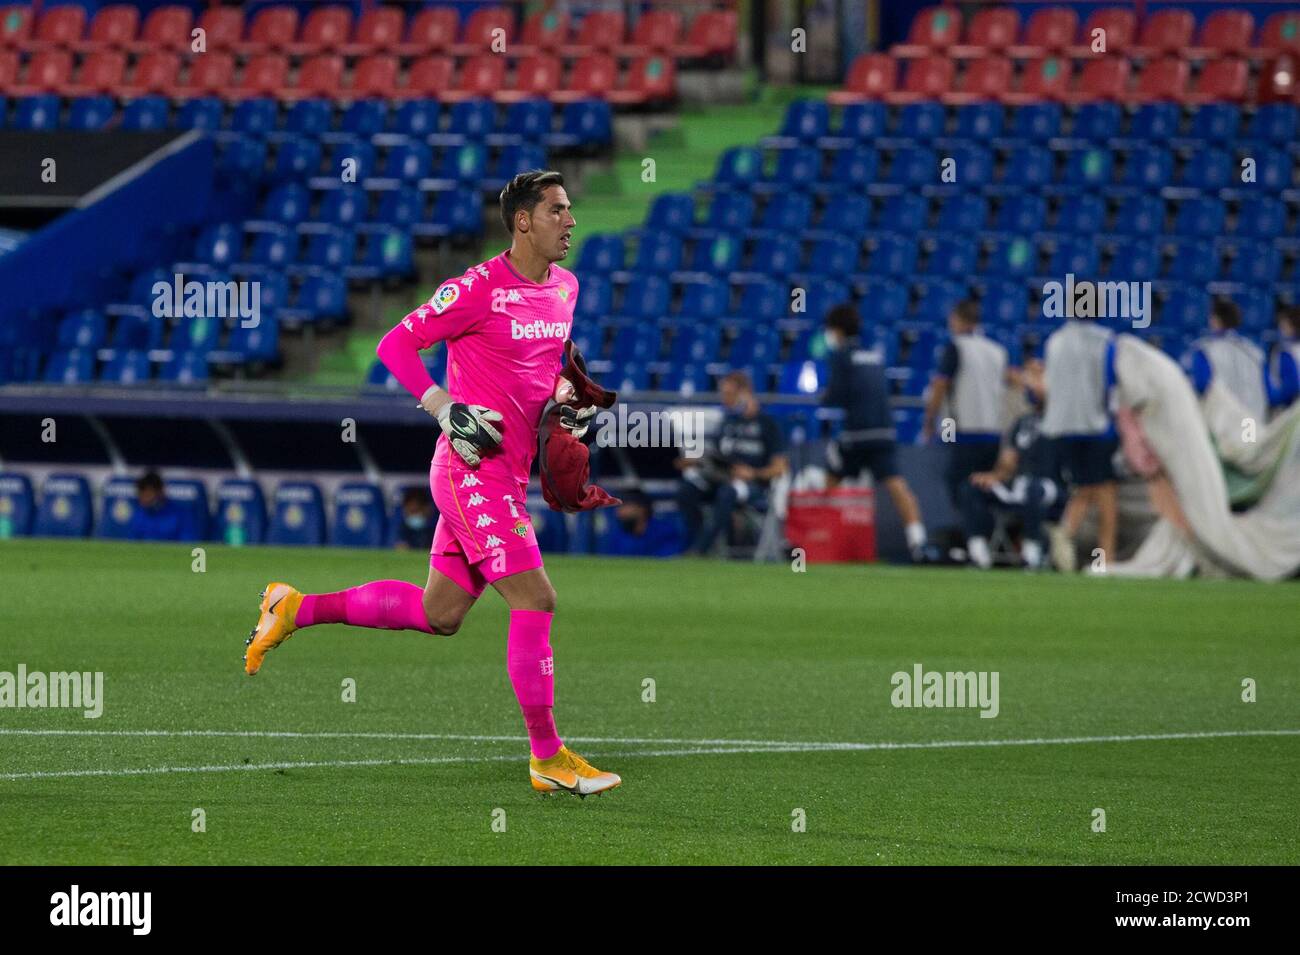 Madrid, Spain. 29th Sep, 2020. JOEL ROBLES OF REAL BETIS DURING LALIGA, FOOTBALL MATCH PLAYED BETWEEN GETAFE CLUB FUTBOL AND REAL BETIS BALOMPIE AT ALFONSO PEREZ COLISEUM ON SEPTEMBER 29, 2020 IN MADRID, SPAIN. Credit: CORDON PRESS/Alamy Live News Stock Photo